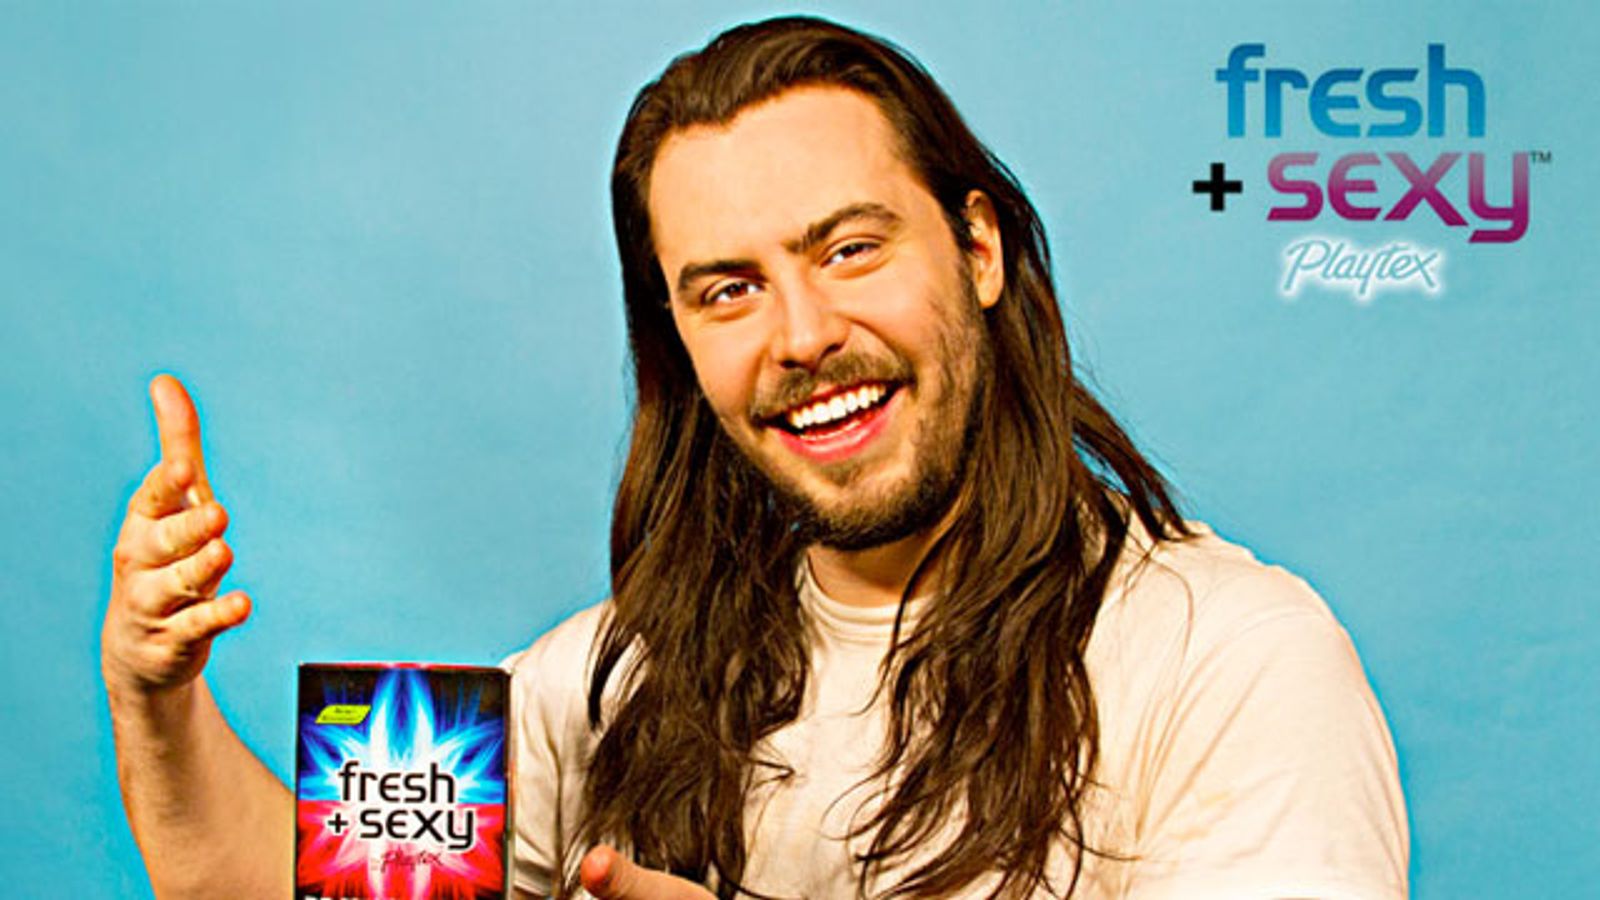 Paradise Marketing: Energizer Personal Care Teams With Andrew W.K. for Fresh + Sexy